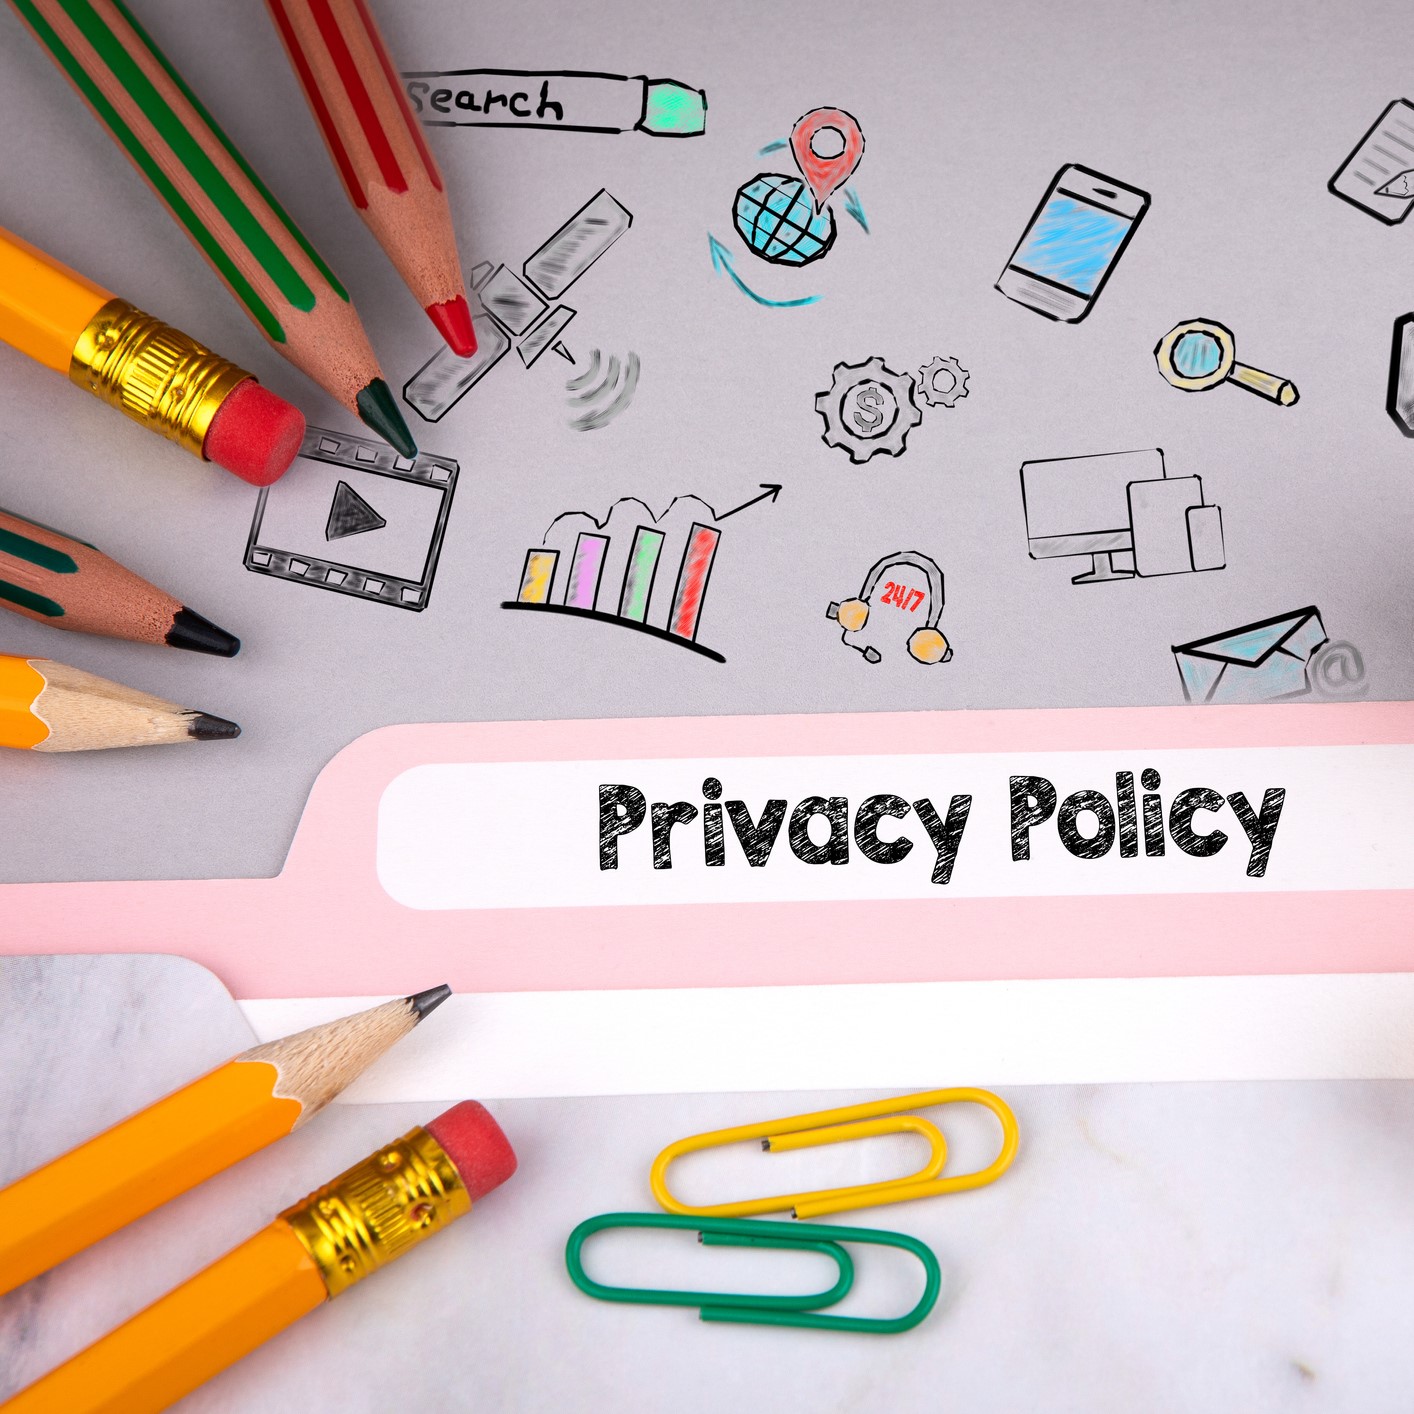 Privacy Policy concept, illustration and icons. Folder register on desk.